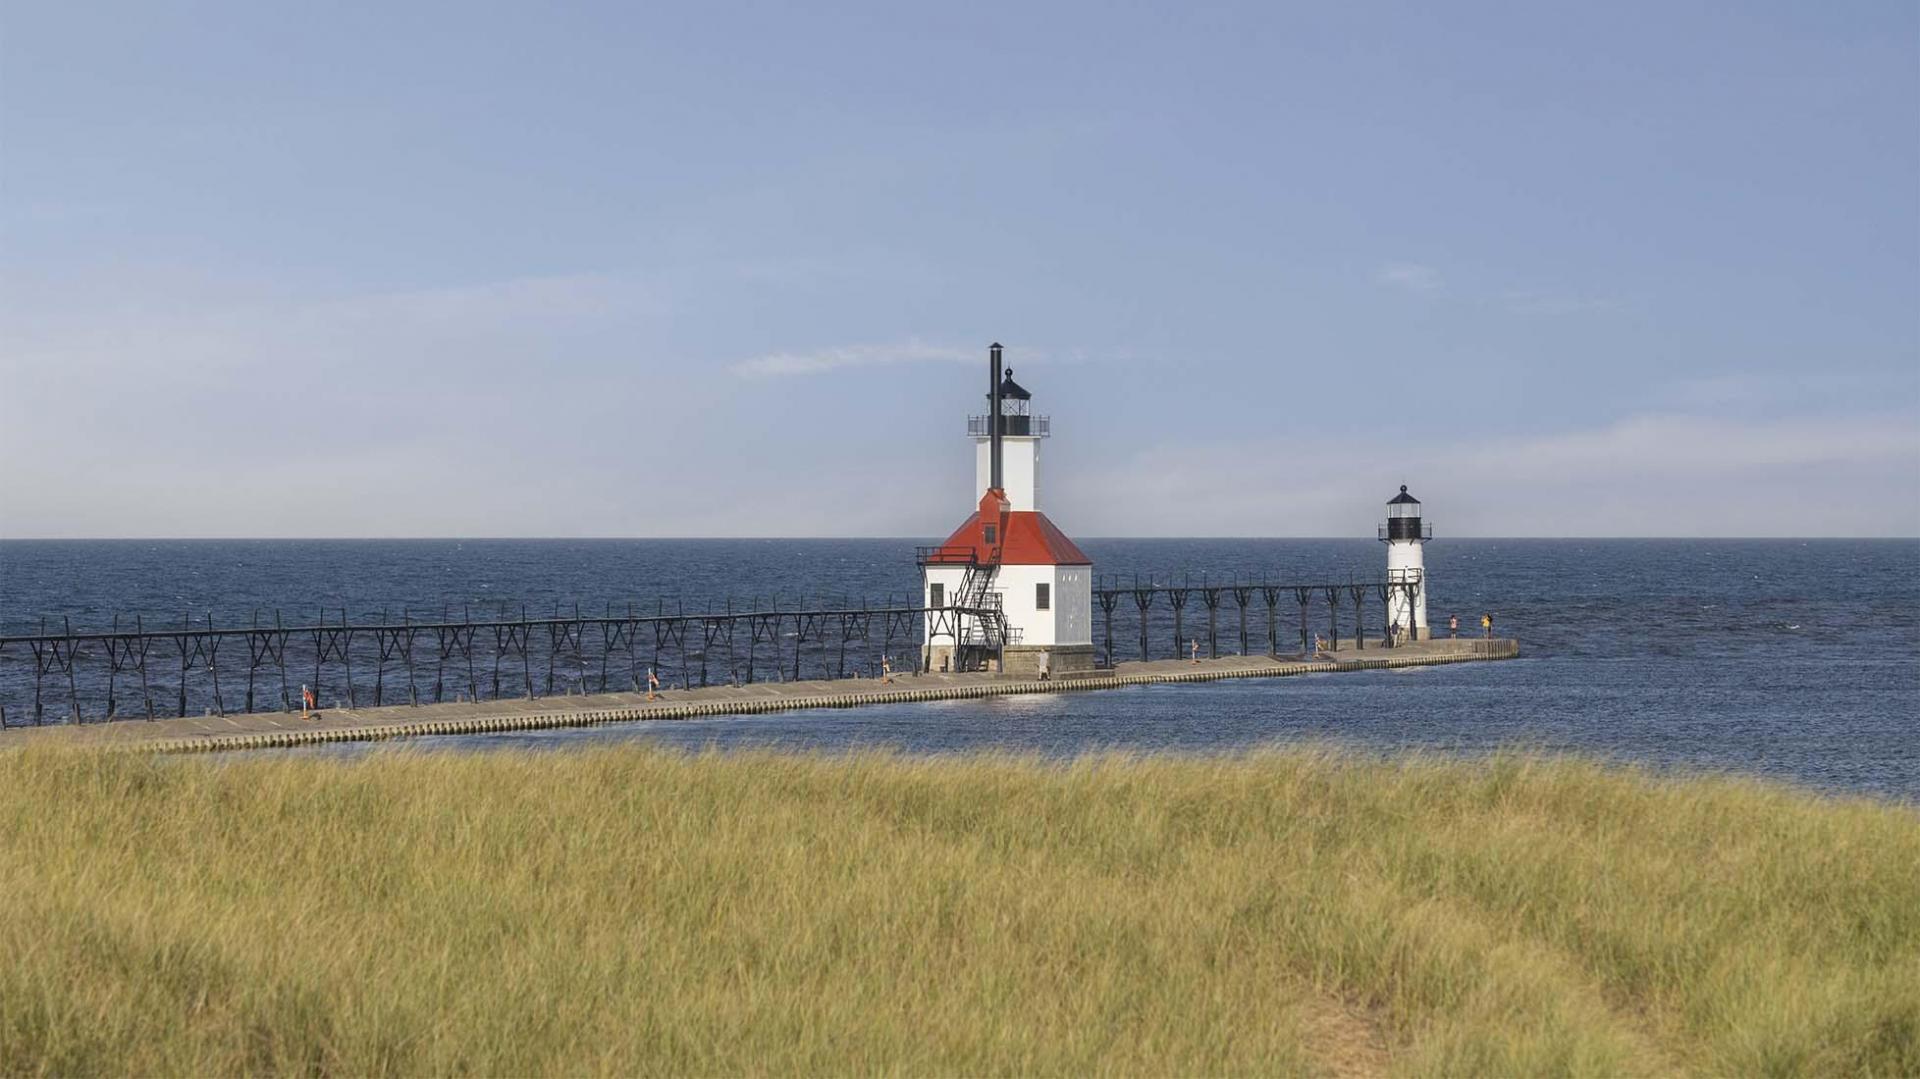 The lighthouse in Saint Joseph on a peaceful summer day.